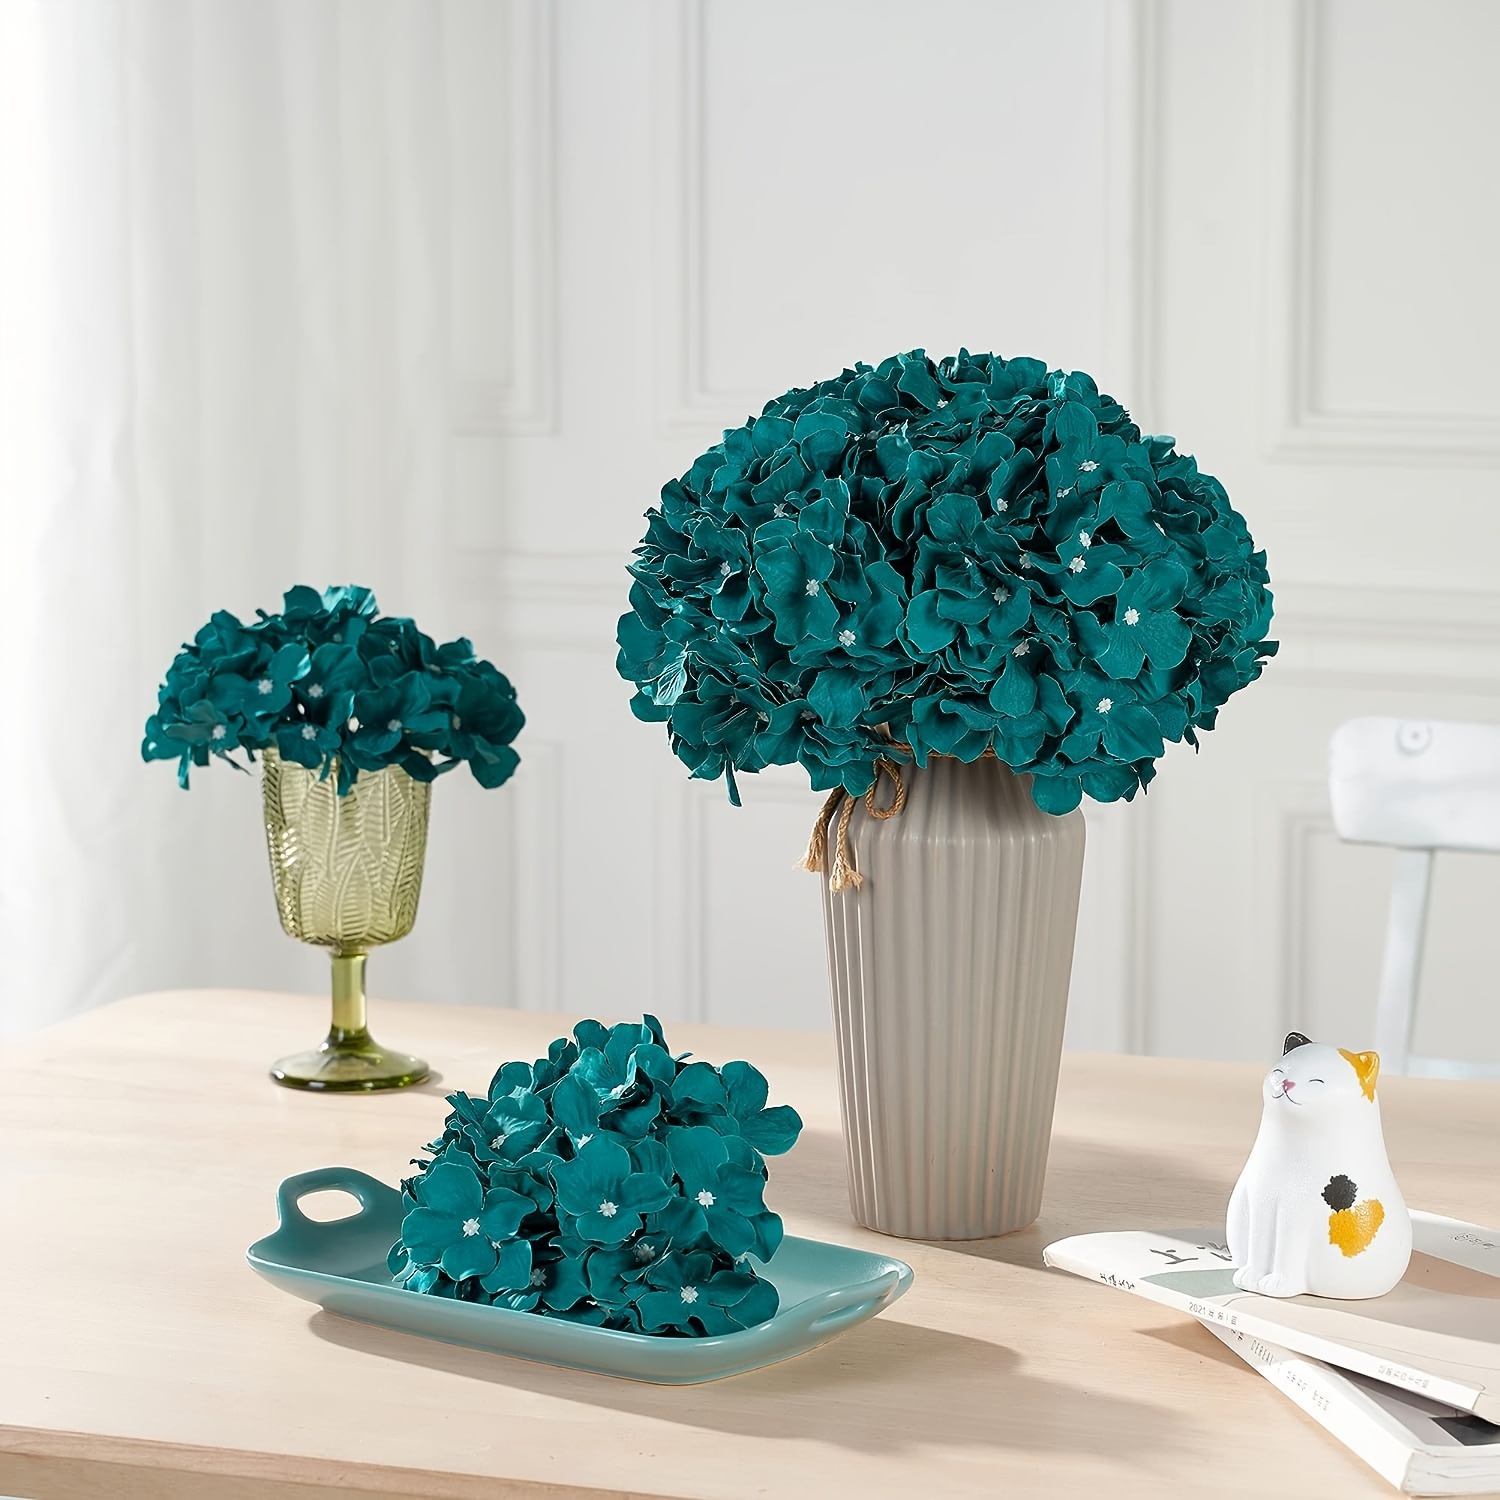 

6-piece Silk Hydrangea Flower Heads With Stems - Perfect For Home & Wedding Decor, No Power Needed